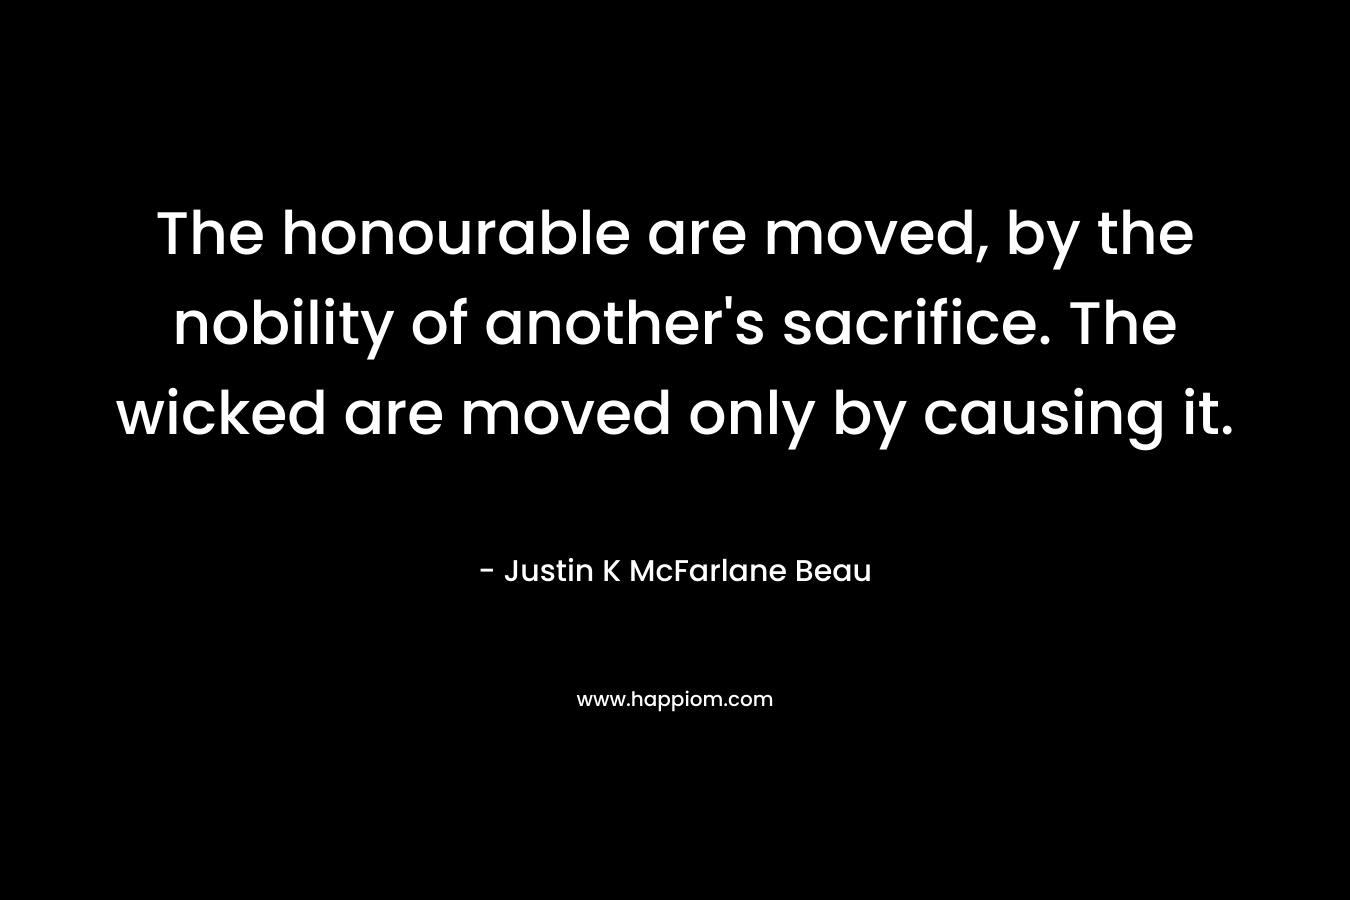 The honourable are moved, by the nobility of another's sacrifice. The wicked are moved only by causing it.